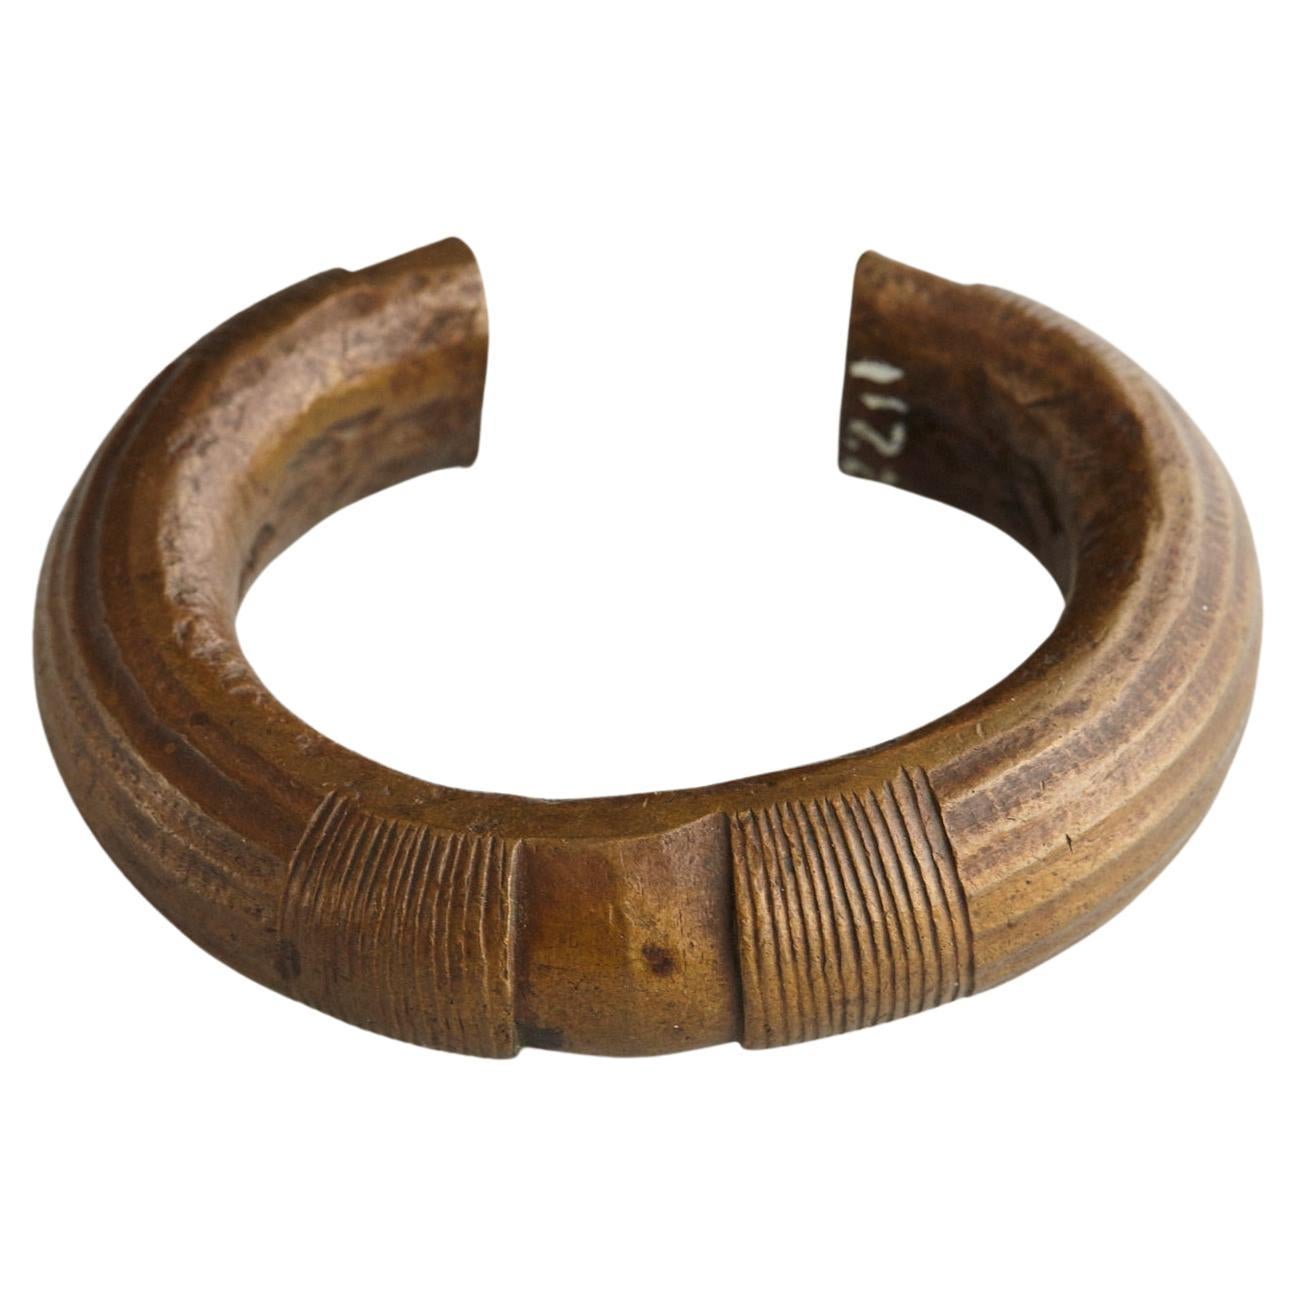 Bronze Currency Bracelet/Manilla, Dogon People, Burkina Faso, 19th c. - No 2 For Sale